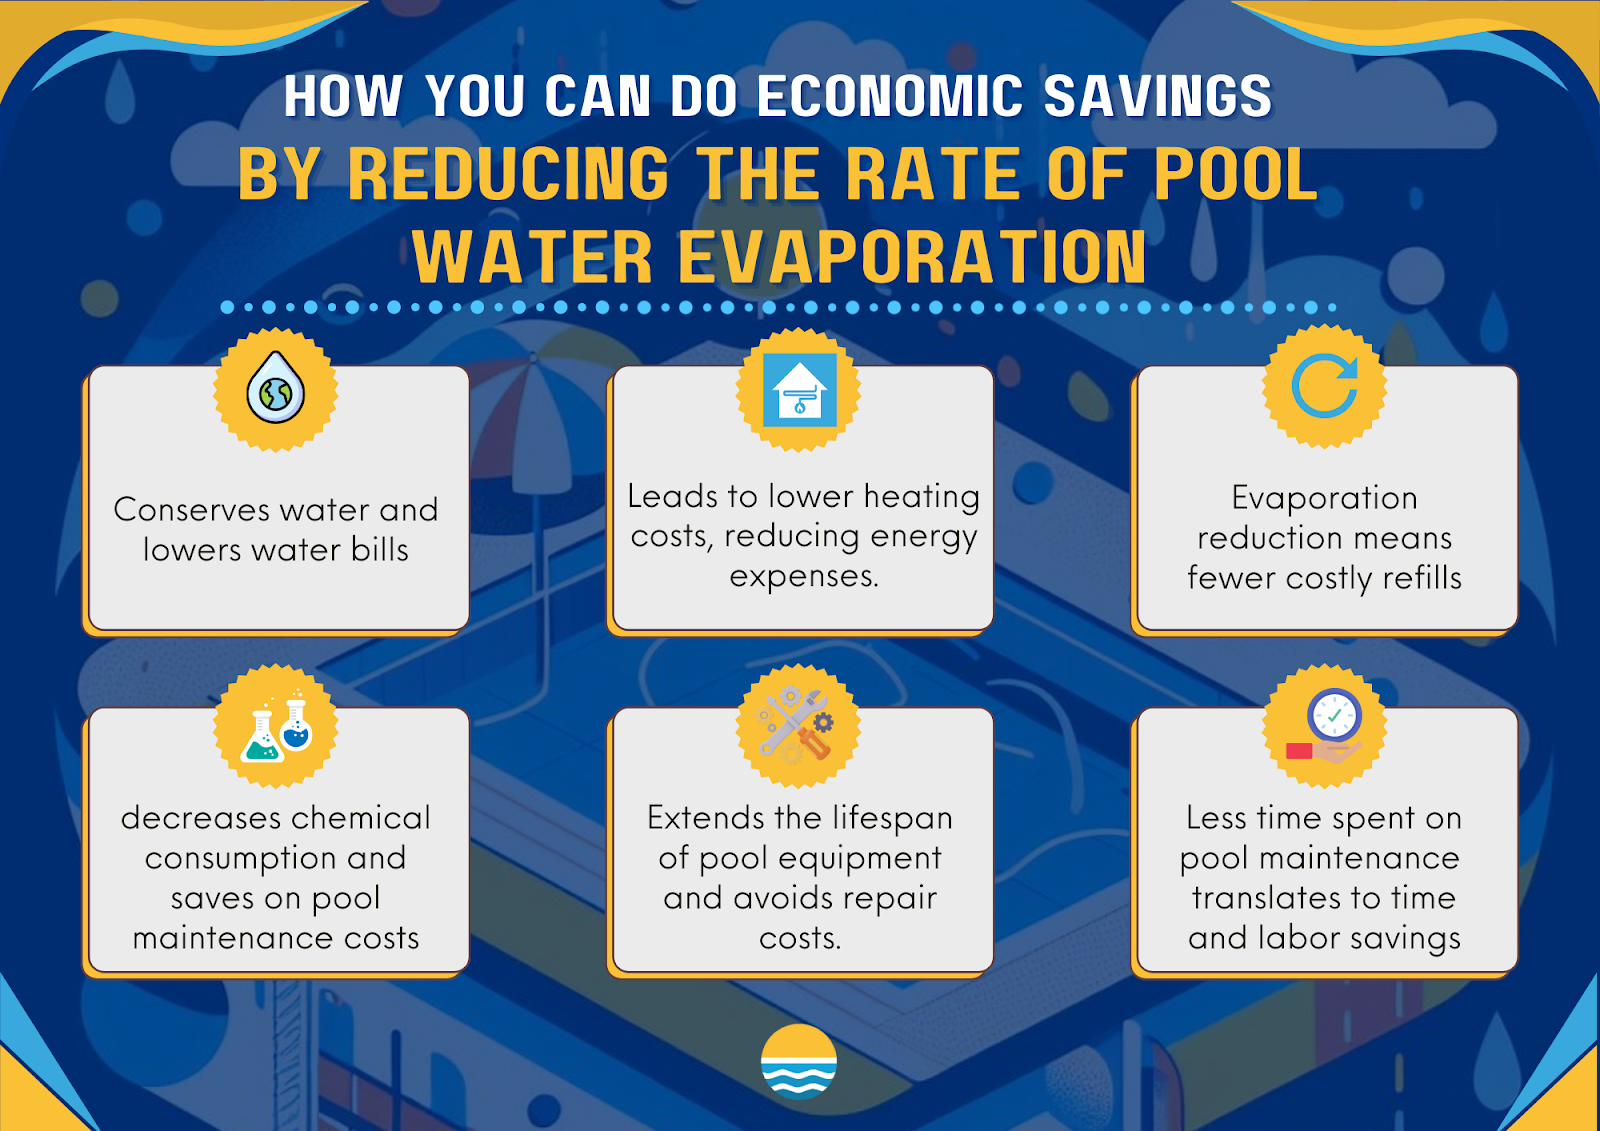 Swimming Pools Covers - How you can achieve economic savings by Reducing the rate of Pool Water Evaporation?

